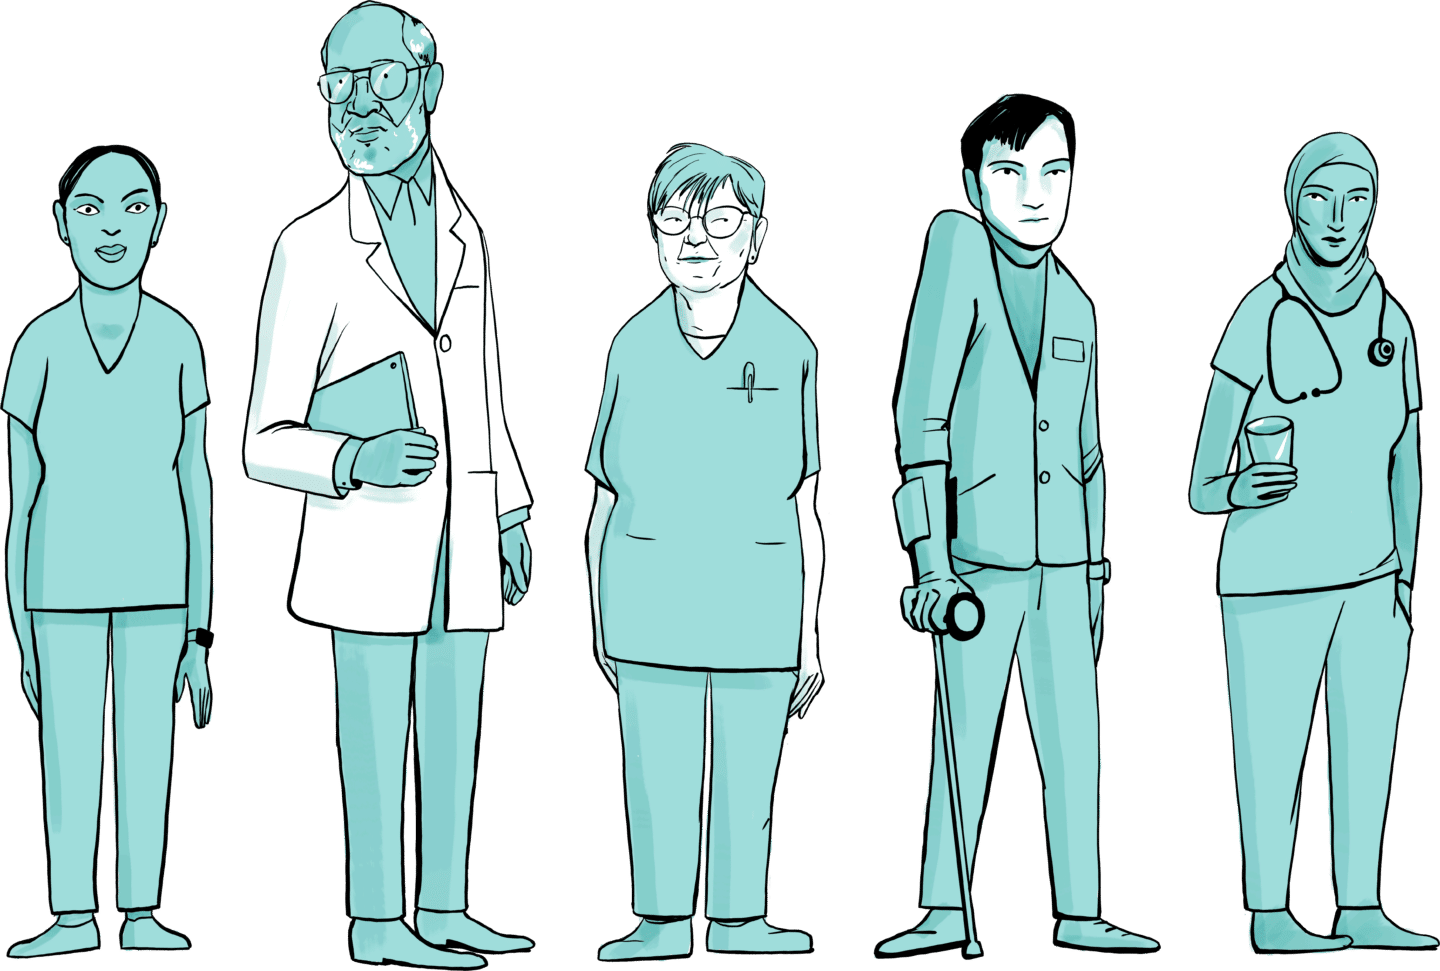 Illustration of five healthcare providers by Graham Roumieu